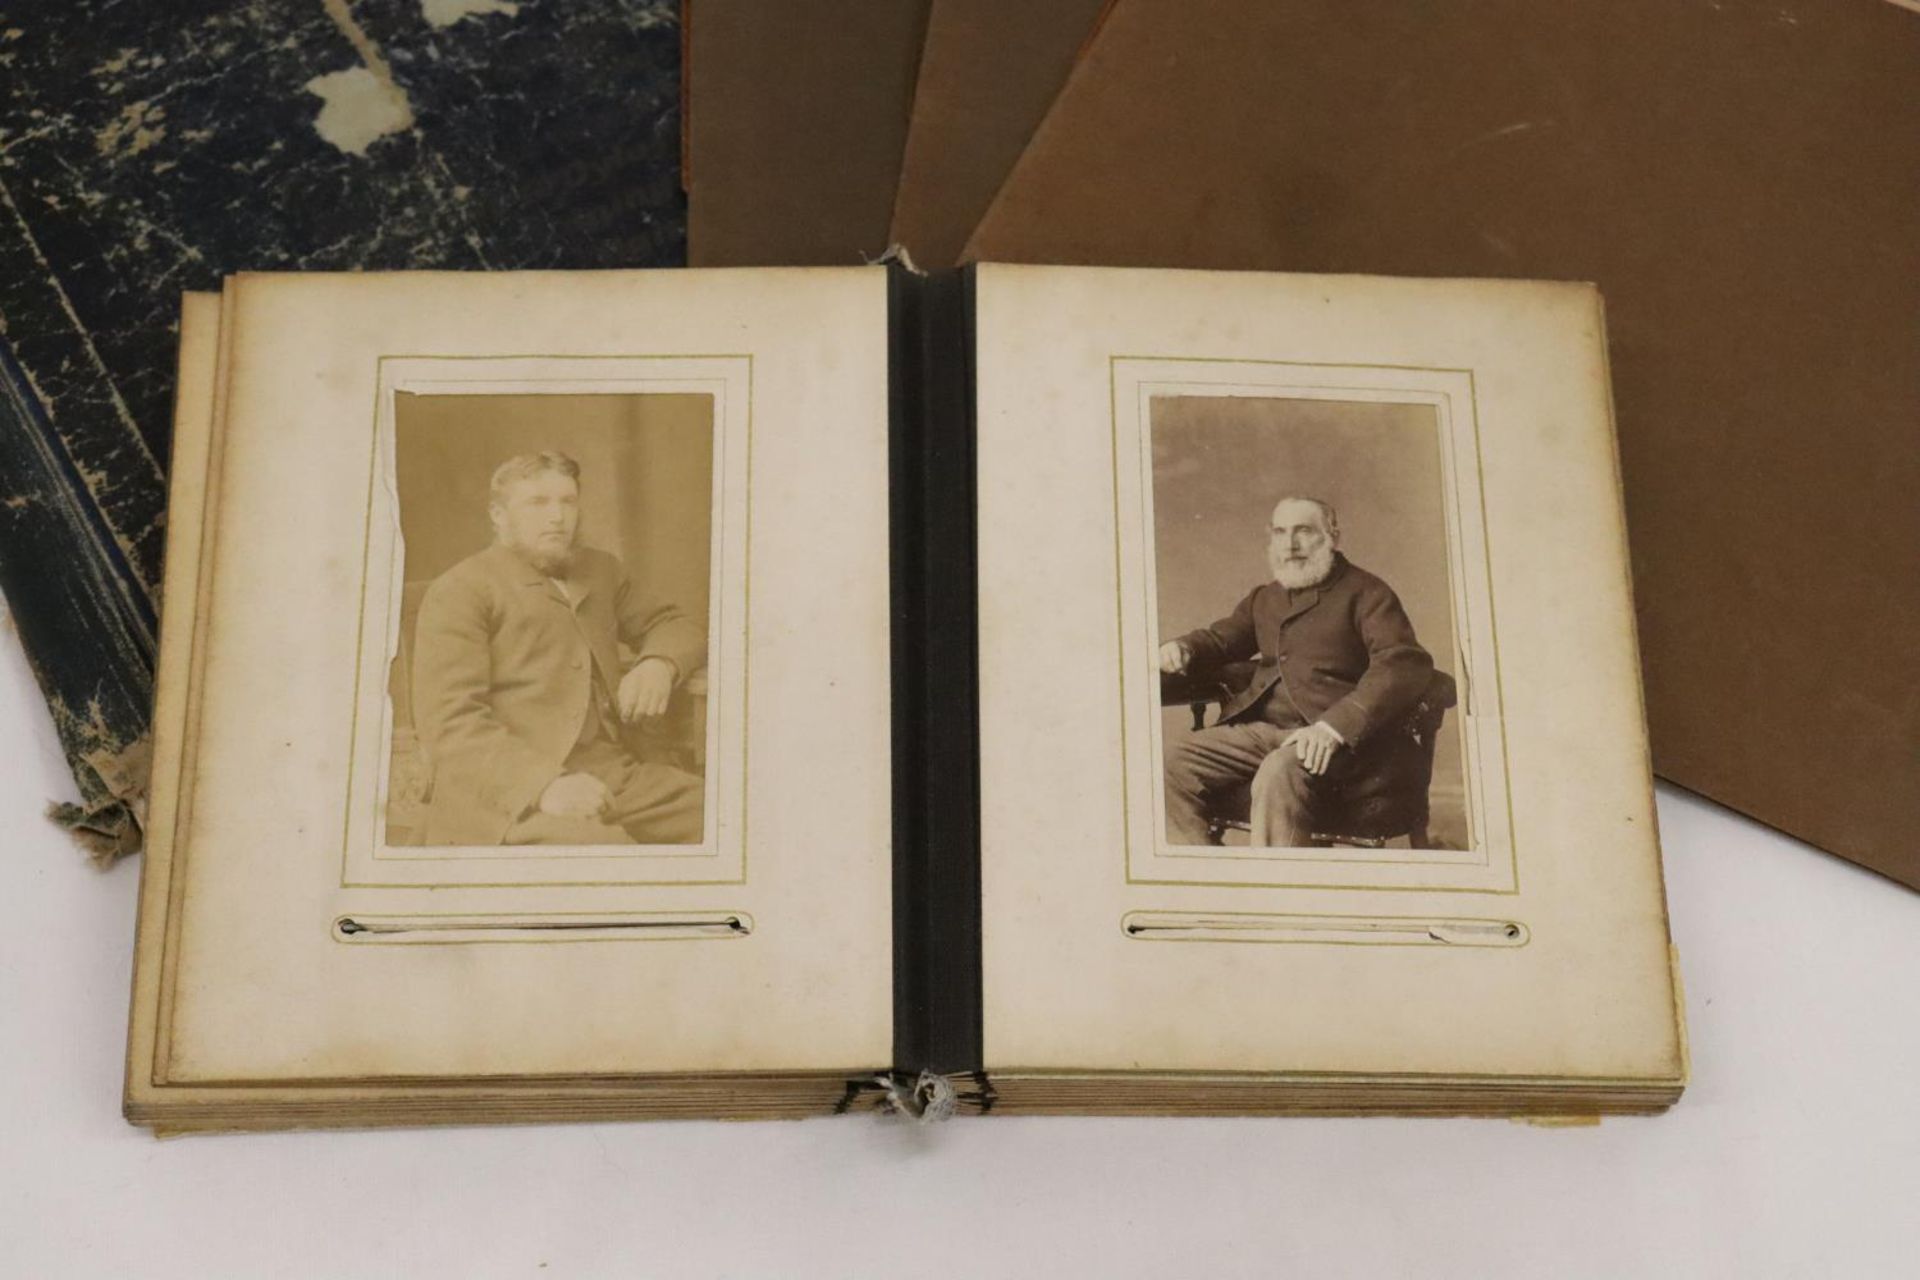 AN ALBUM OF VINTAGE PHOTOGRAPHS, A COPY OF NEEDLECRAFT MAGAZINE PRICE 2D AND THREE VICTORIA AND - Image 2 of 5